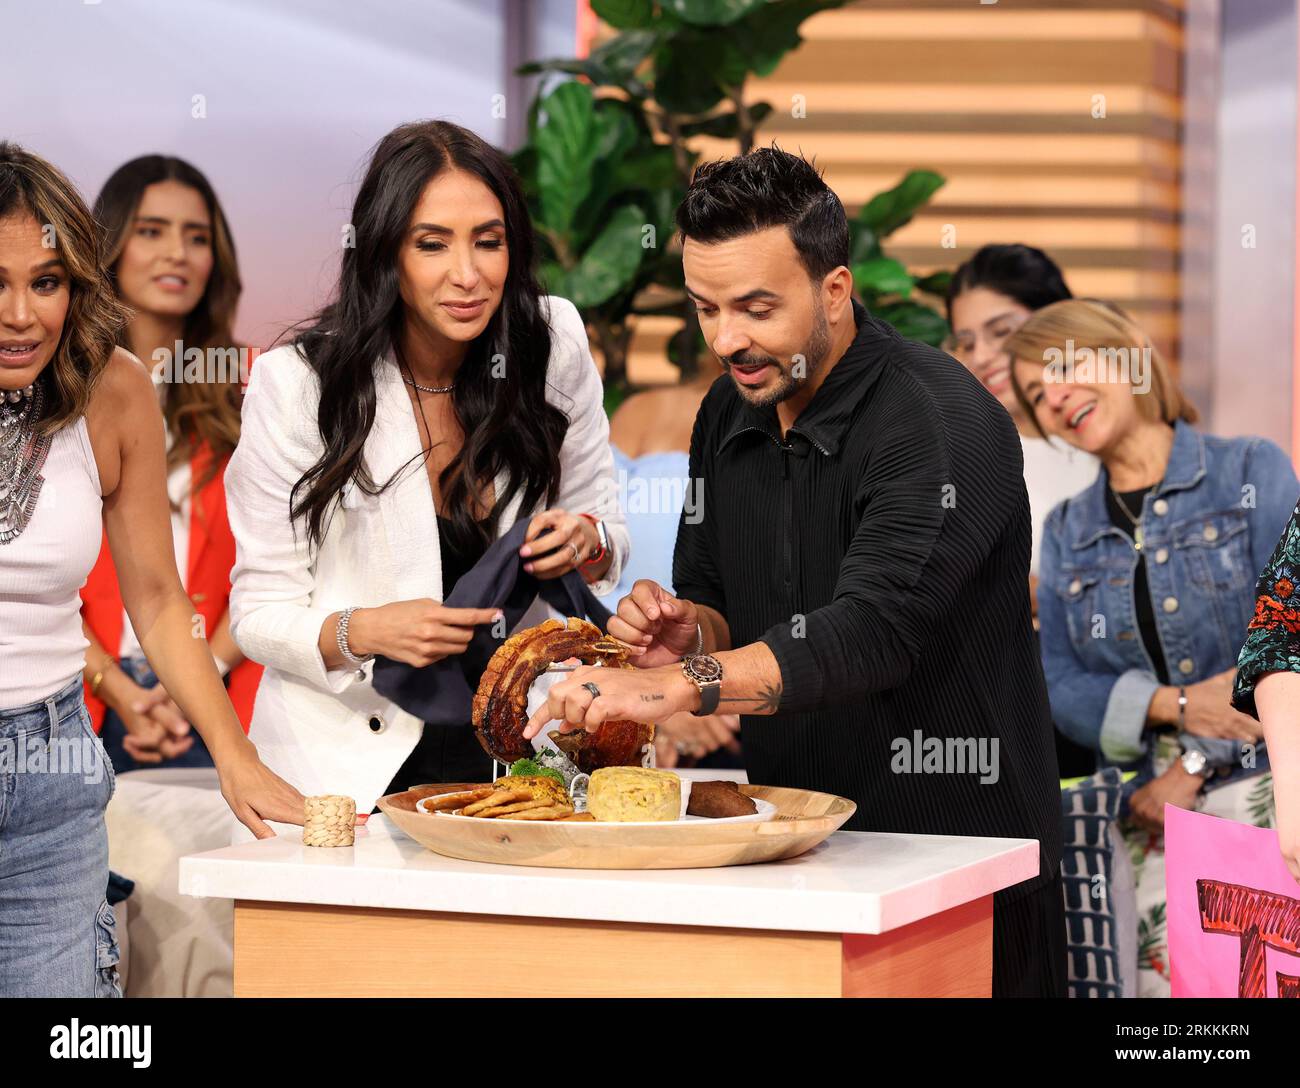 Miami, United States Of America. 24th Aug, 2023. DORAL, FL-AUG 25: Cynthia Urias and Luis Fonsi are seen during Univision “Despierta America” on August 25, 2023 in Doral, Florida. (Photo by Alberto E. Tamargo/Sipa USA) Credit: Sipa USA/Alamy Live News Stock Photo